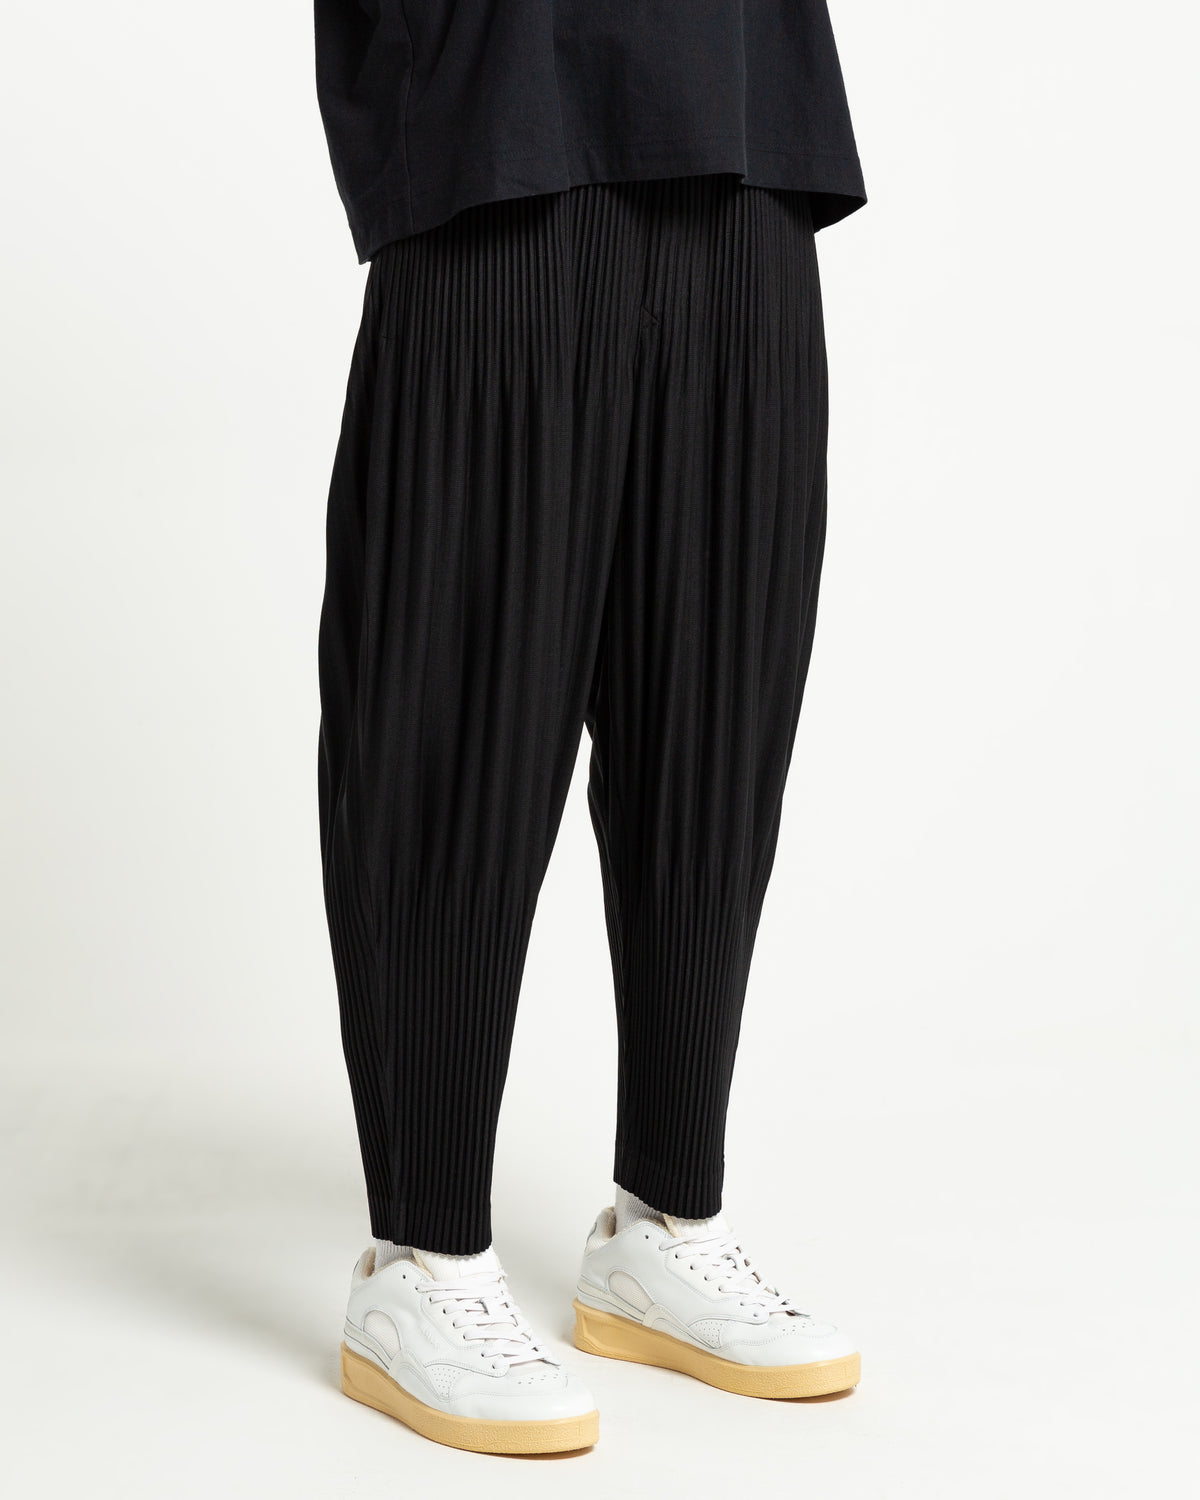 Basic Tapered Pleated Pants in Black Homme Plissé Issey Miyake